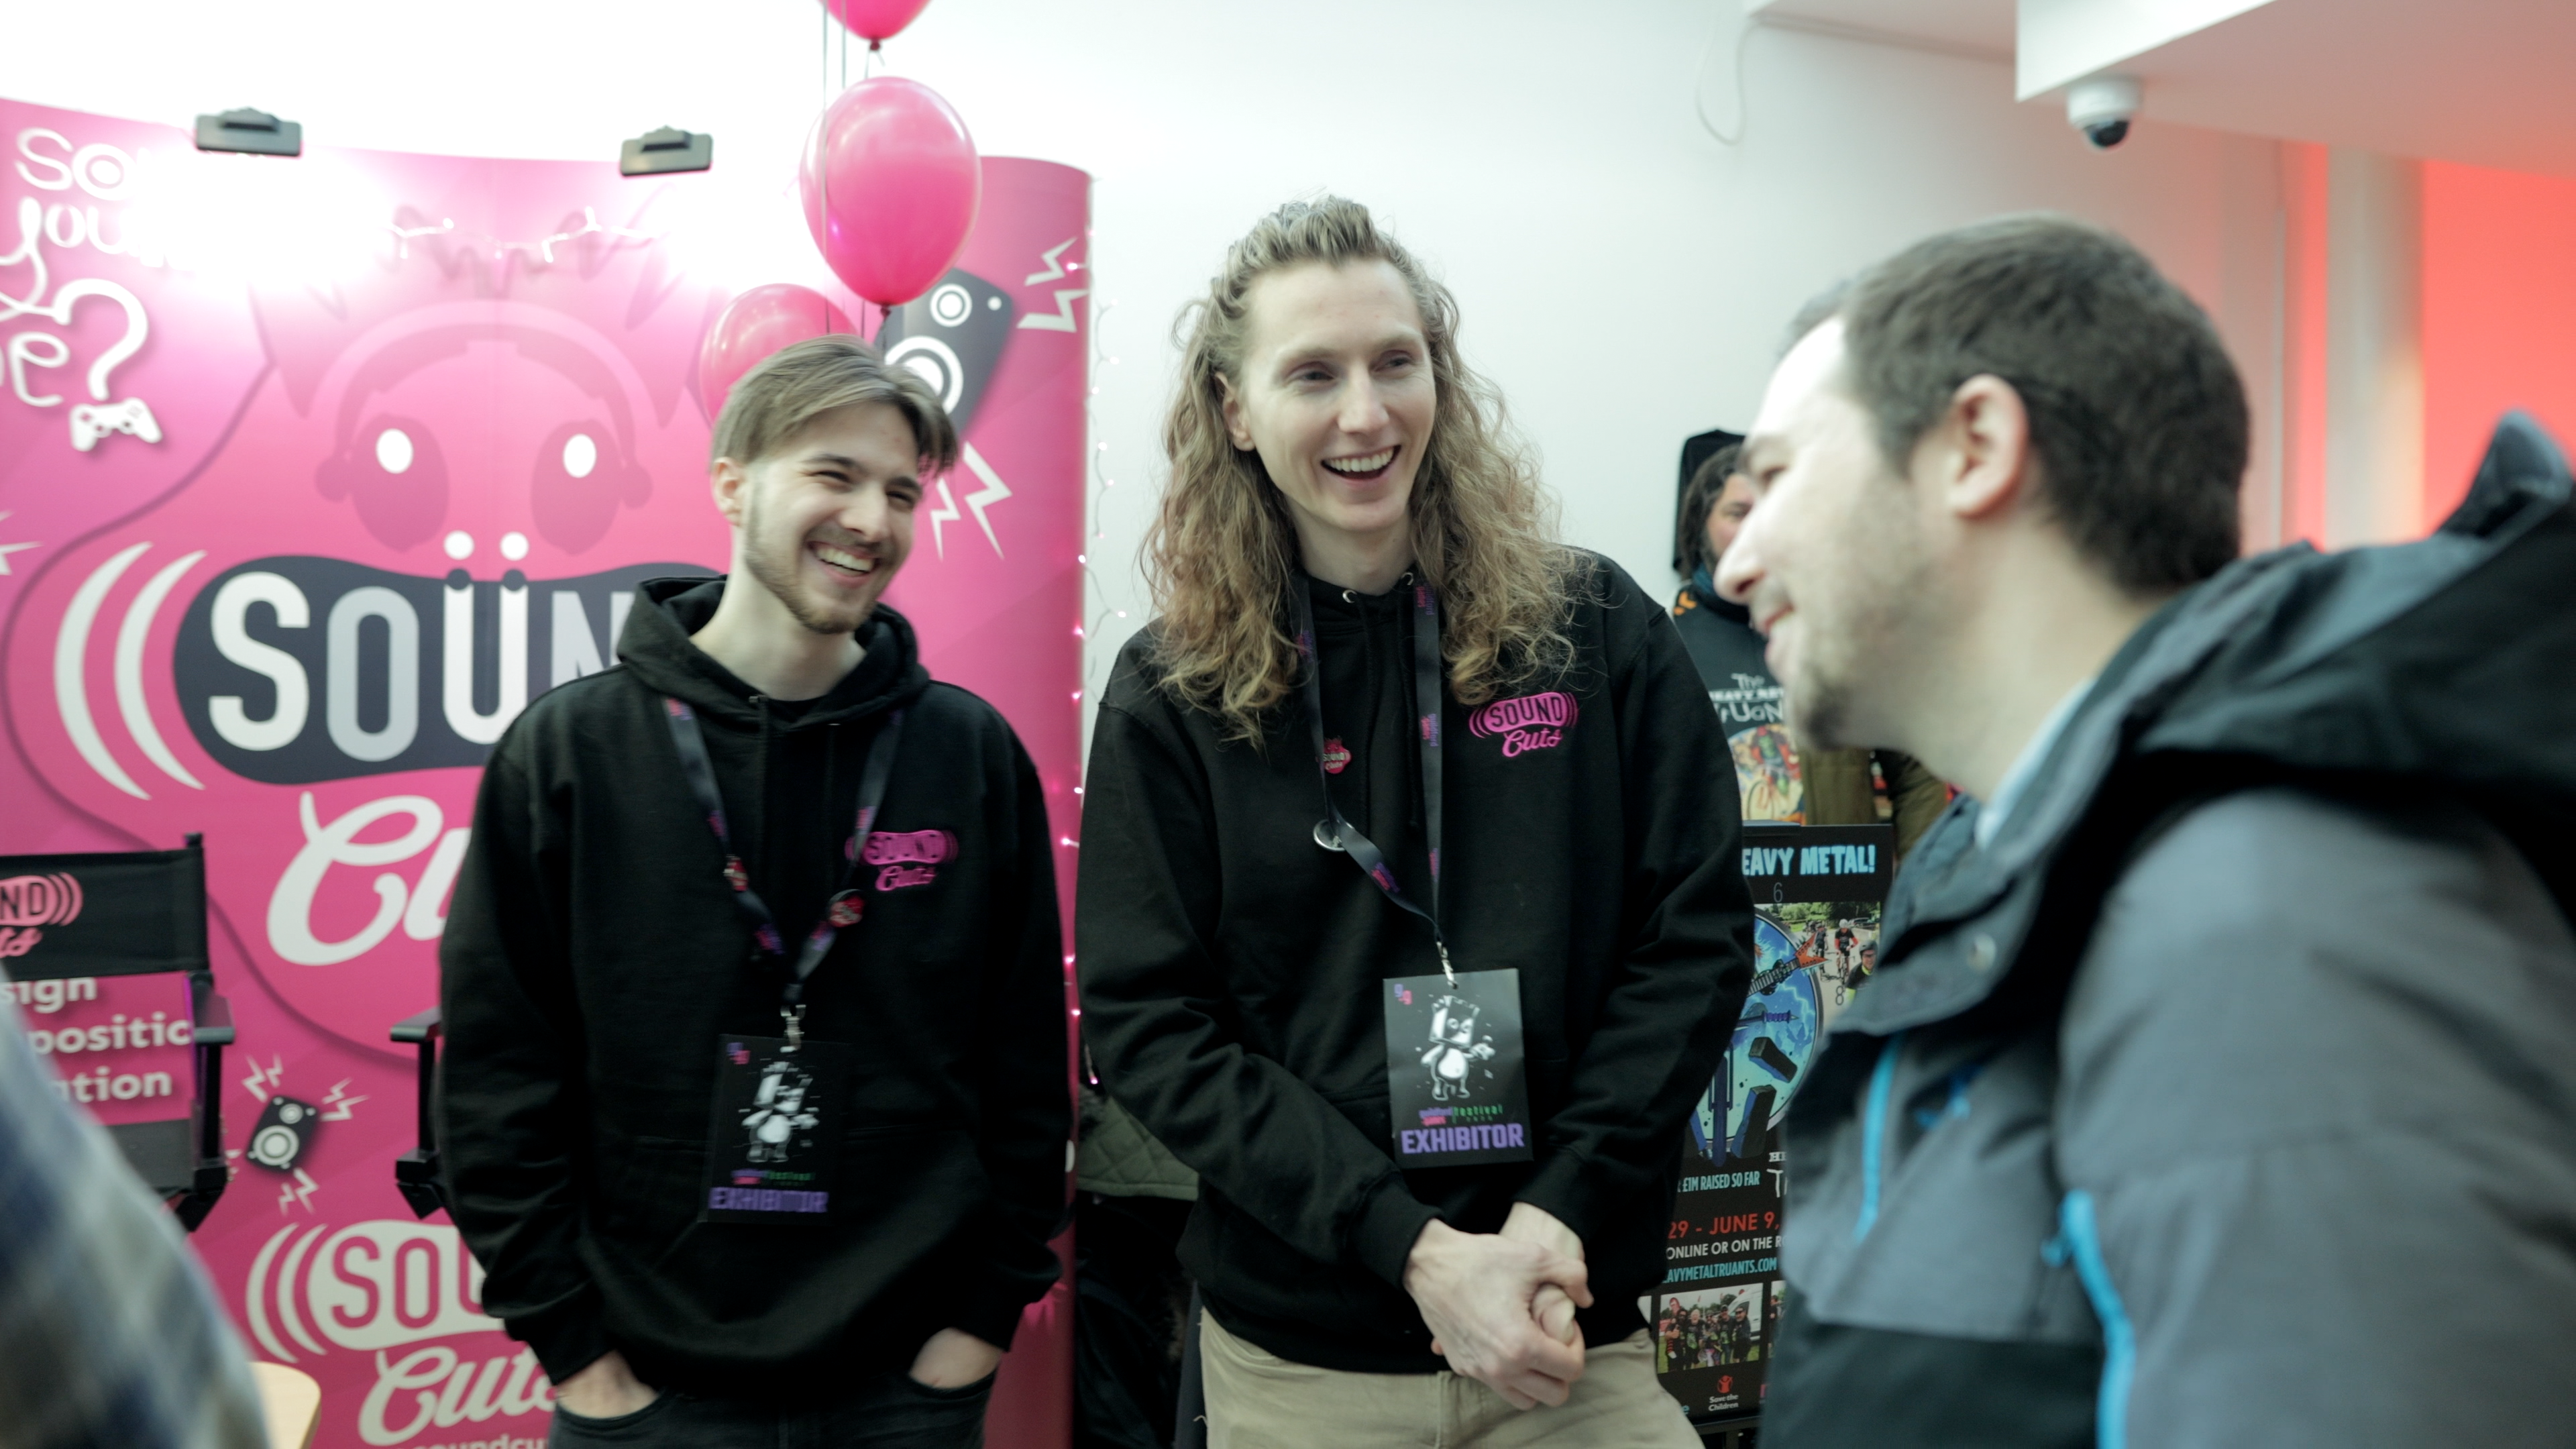 Greg Lester (left) and Lewis Thompson (right) at Guildford.Games Festival